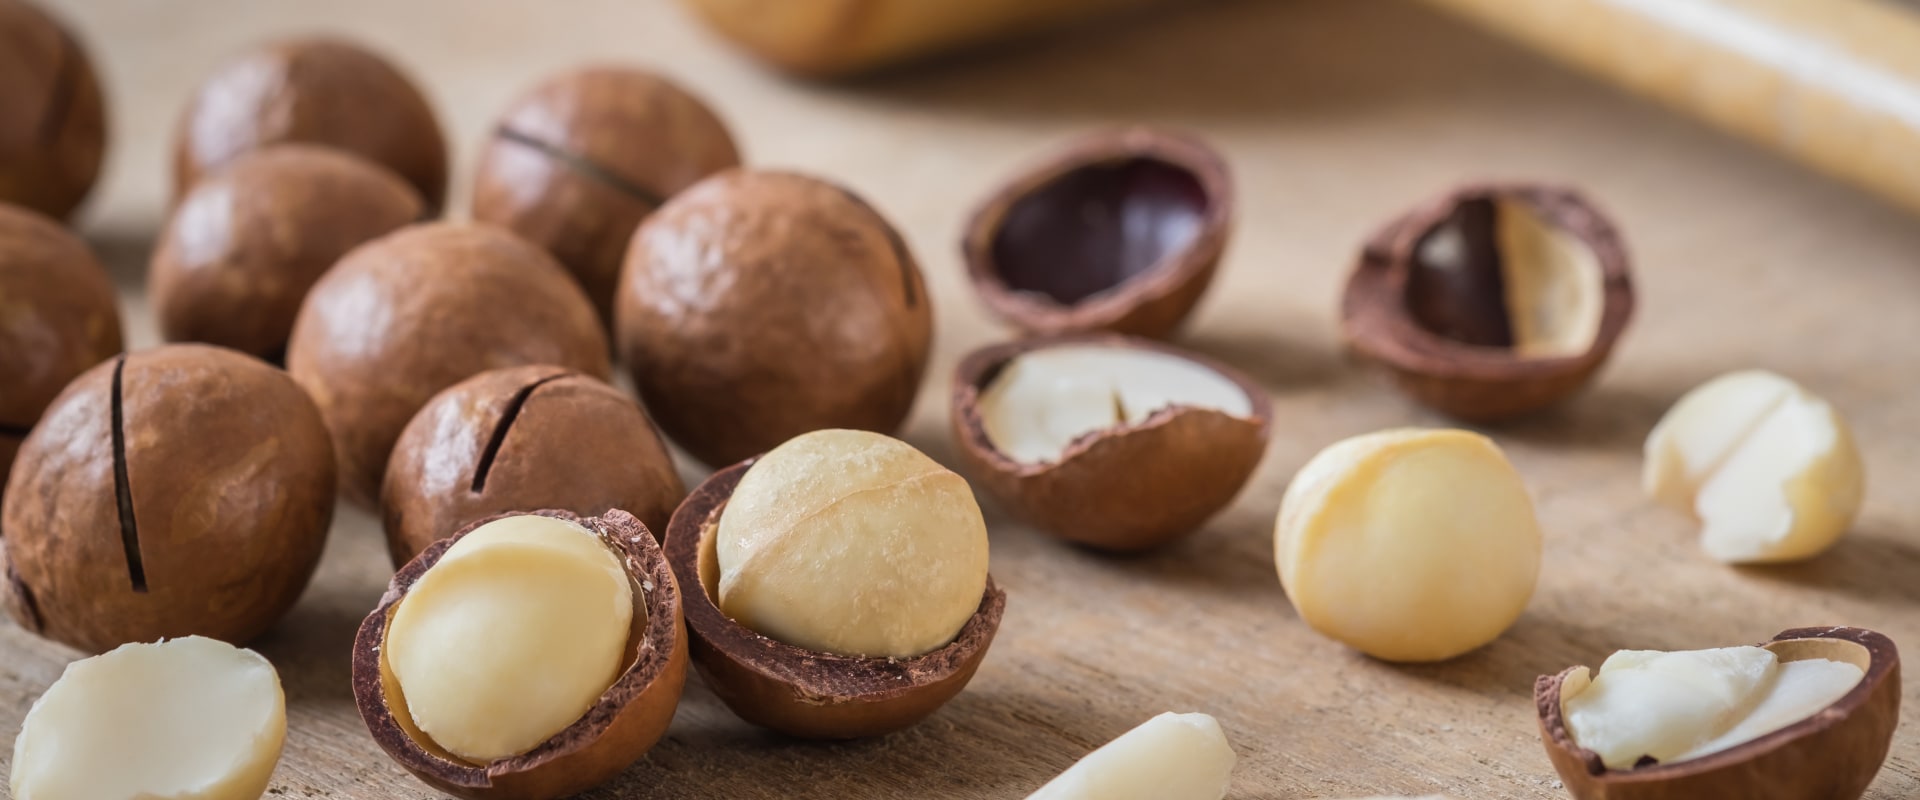 Do you have to dry macadamia nuts?